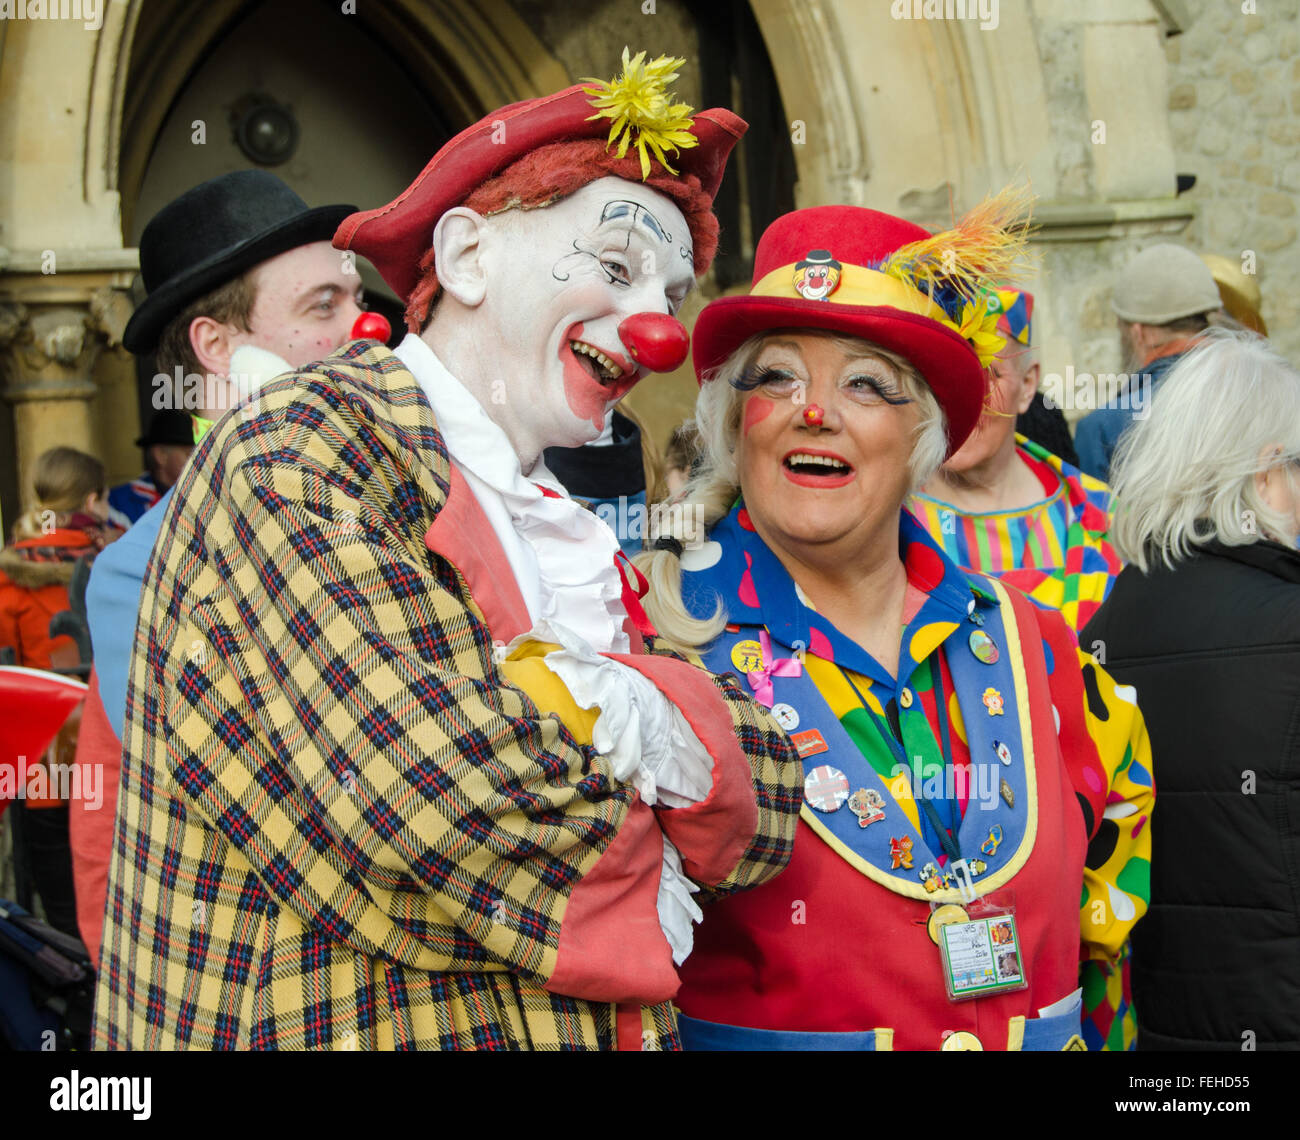 Hackney, London, UK. 7th February, 2016. Female clown Pip jokes with a colleague before the Annual Clown Service in memory of Joseph Grimaldi held at All Saints Church, Haggerston, Hackney in London's East End. Credit:  Amanda Lewis/Alamy Live News Stock Photo